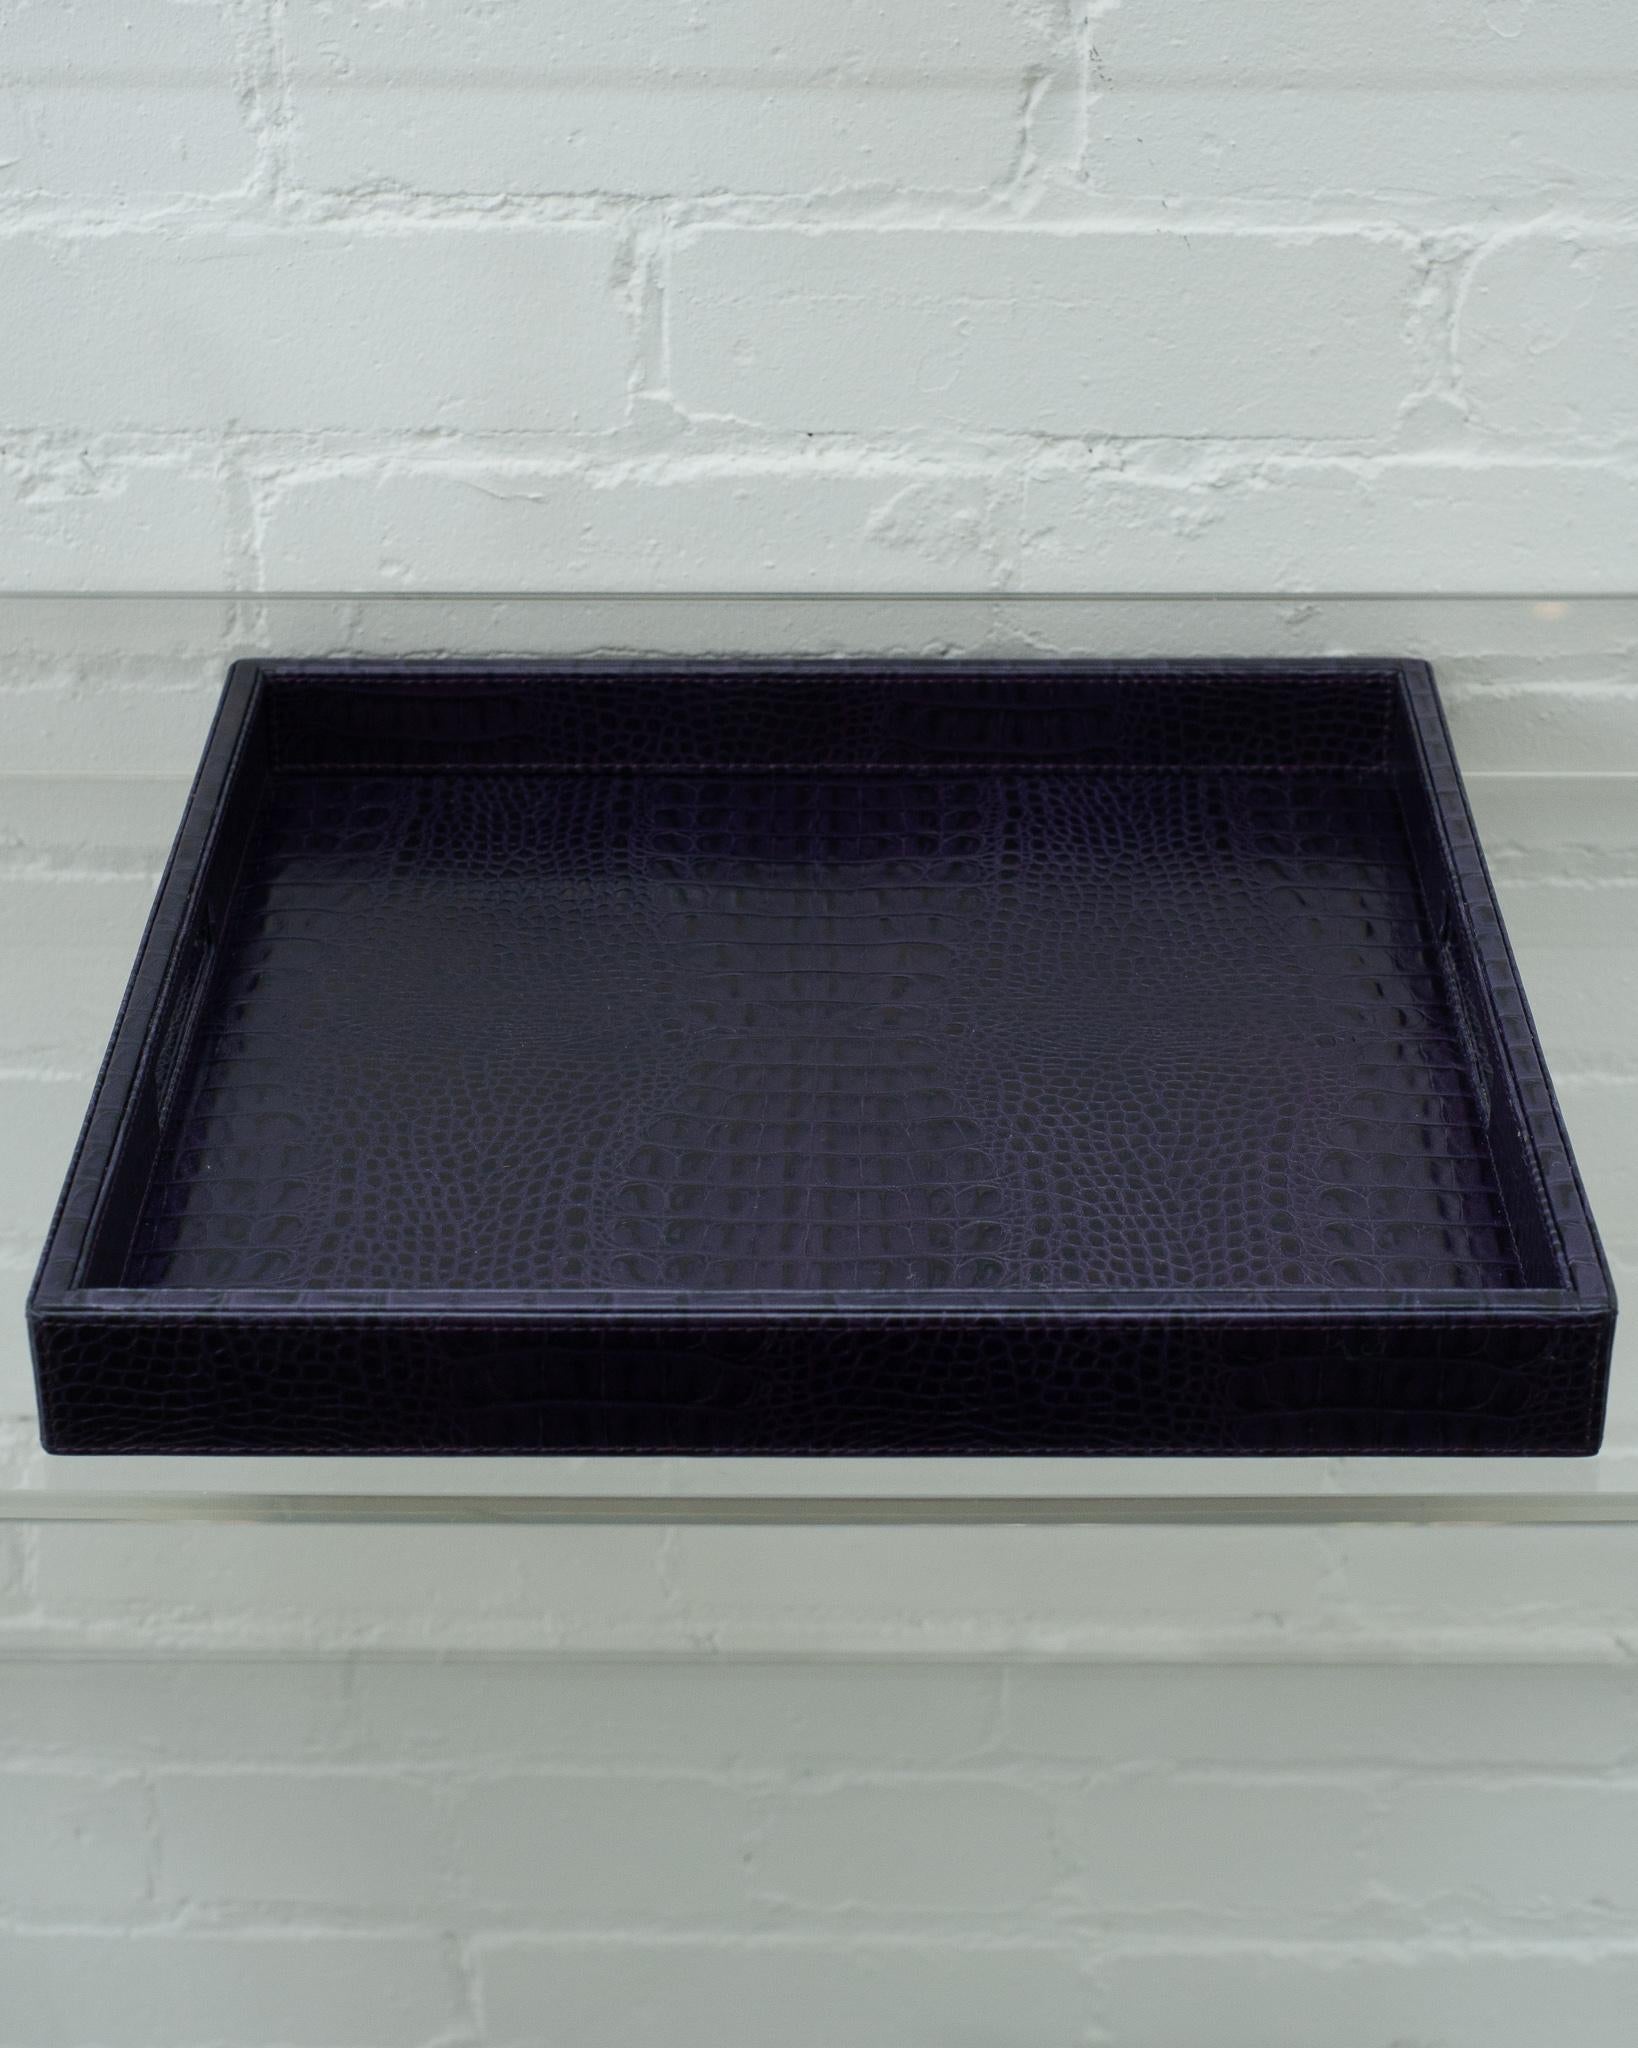 A beautiful deep purple crocodile embossed leather tray, perfect for the desk, bedside table, or use as a serving piece. Fully wrapped in embossed leather with stitched panels, each tray has two openings for carrying.